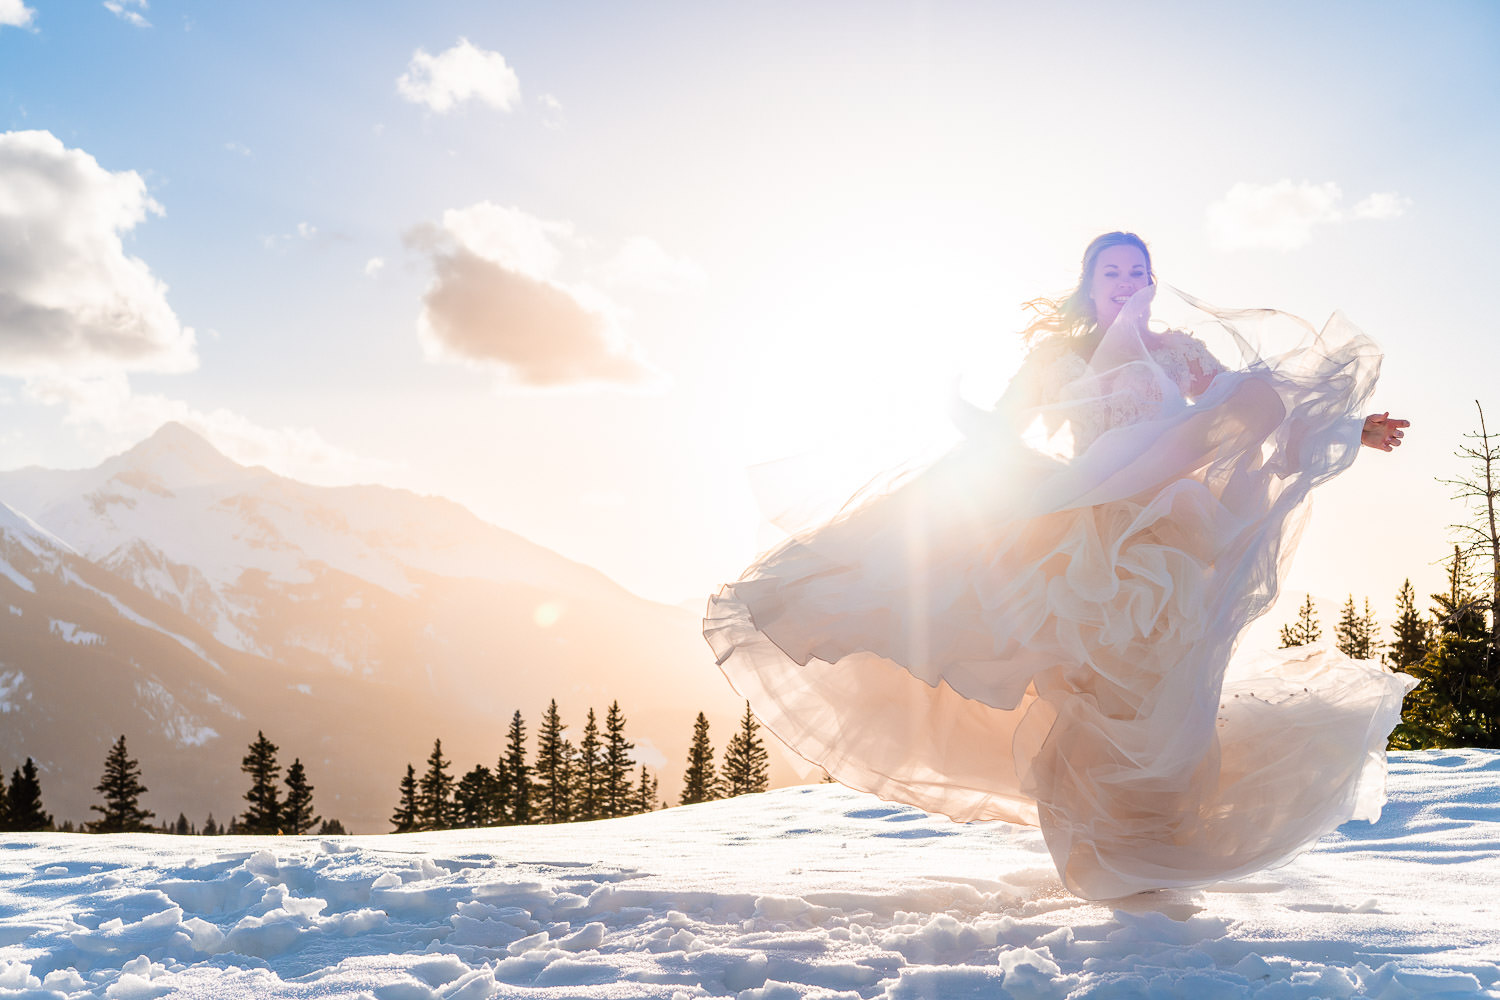 newly wed bride on a snow covered mountain